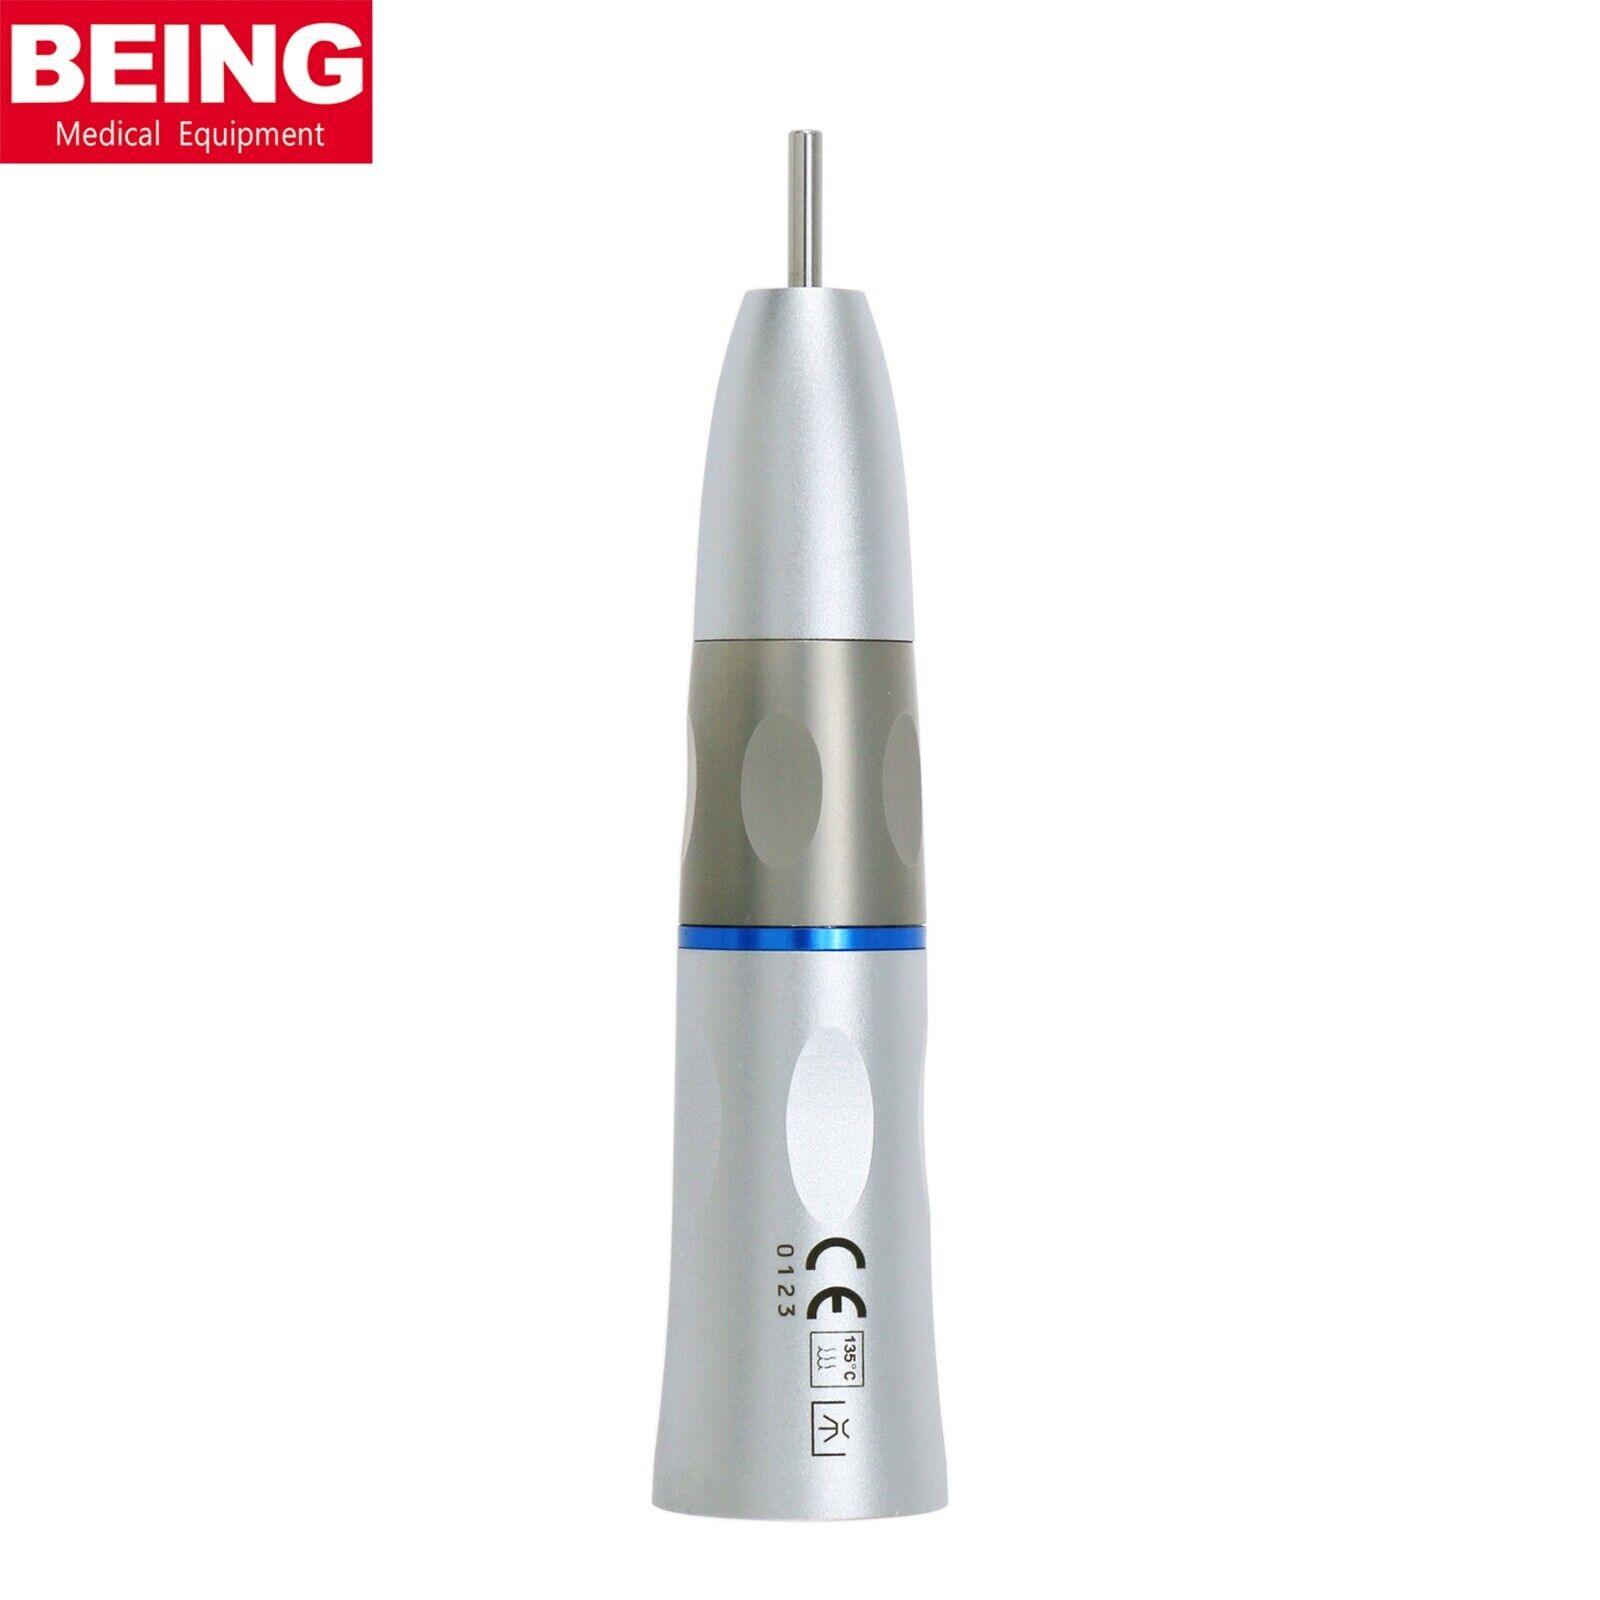 BEING Dental Fiber Optic Inner Water Straight Nose Cone Handpiece fit KaVo NSK